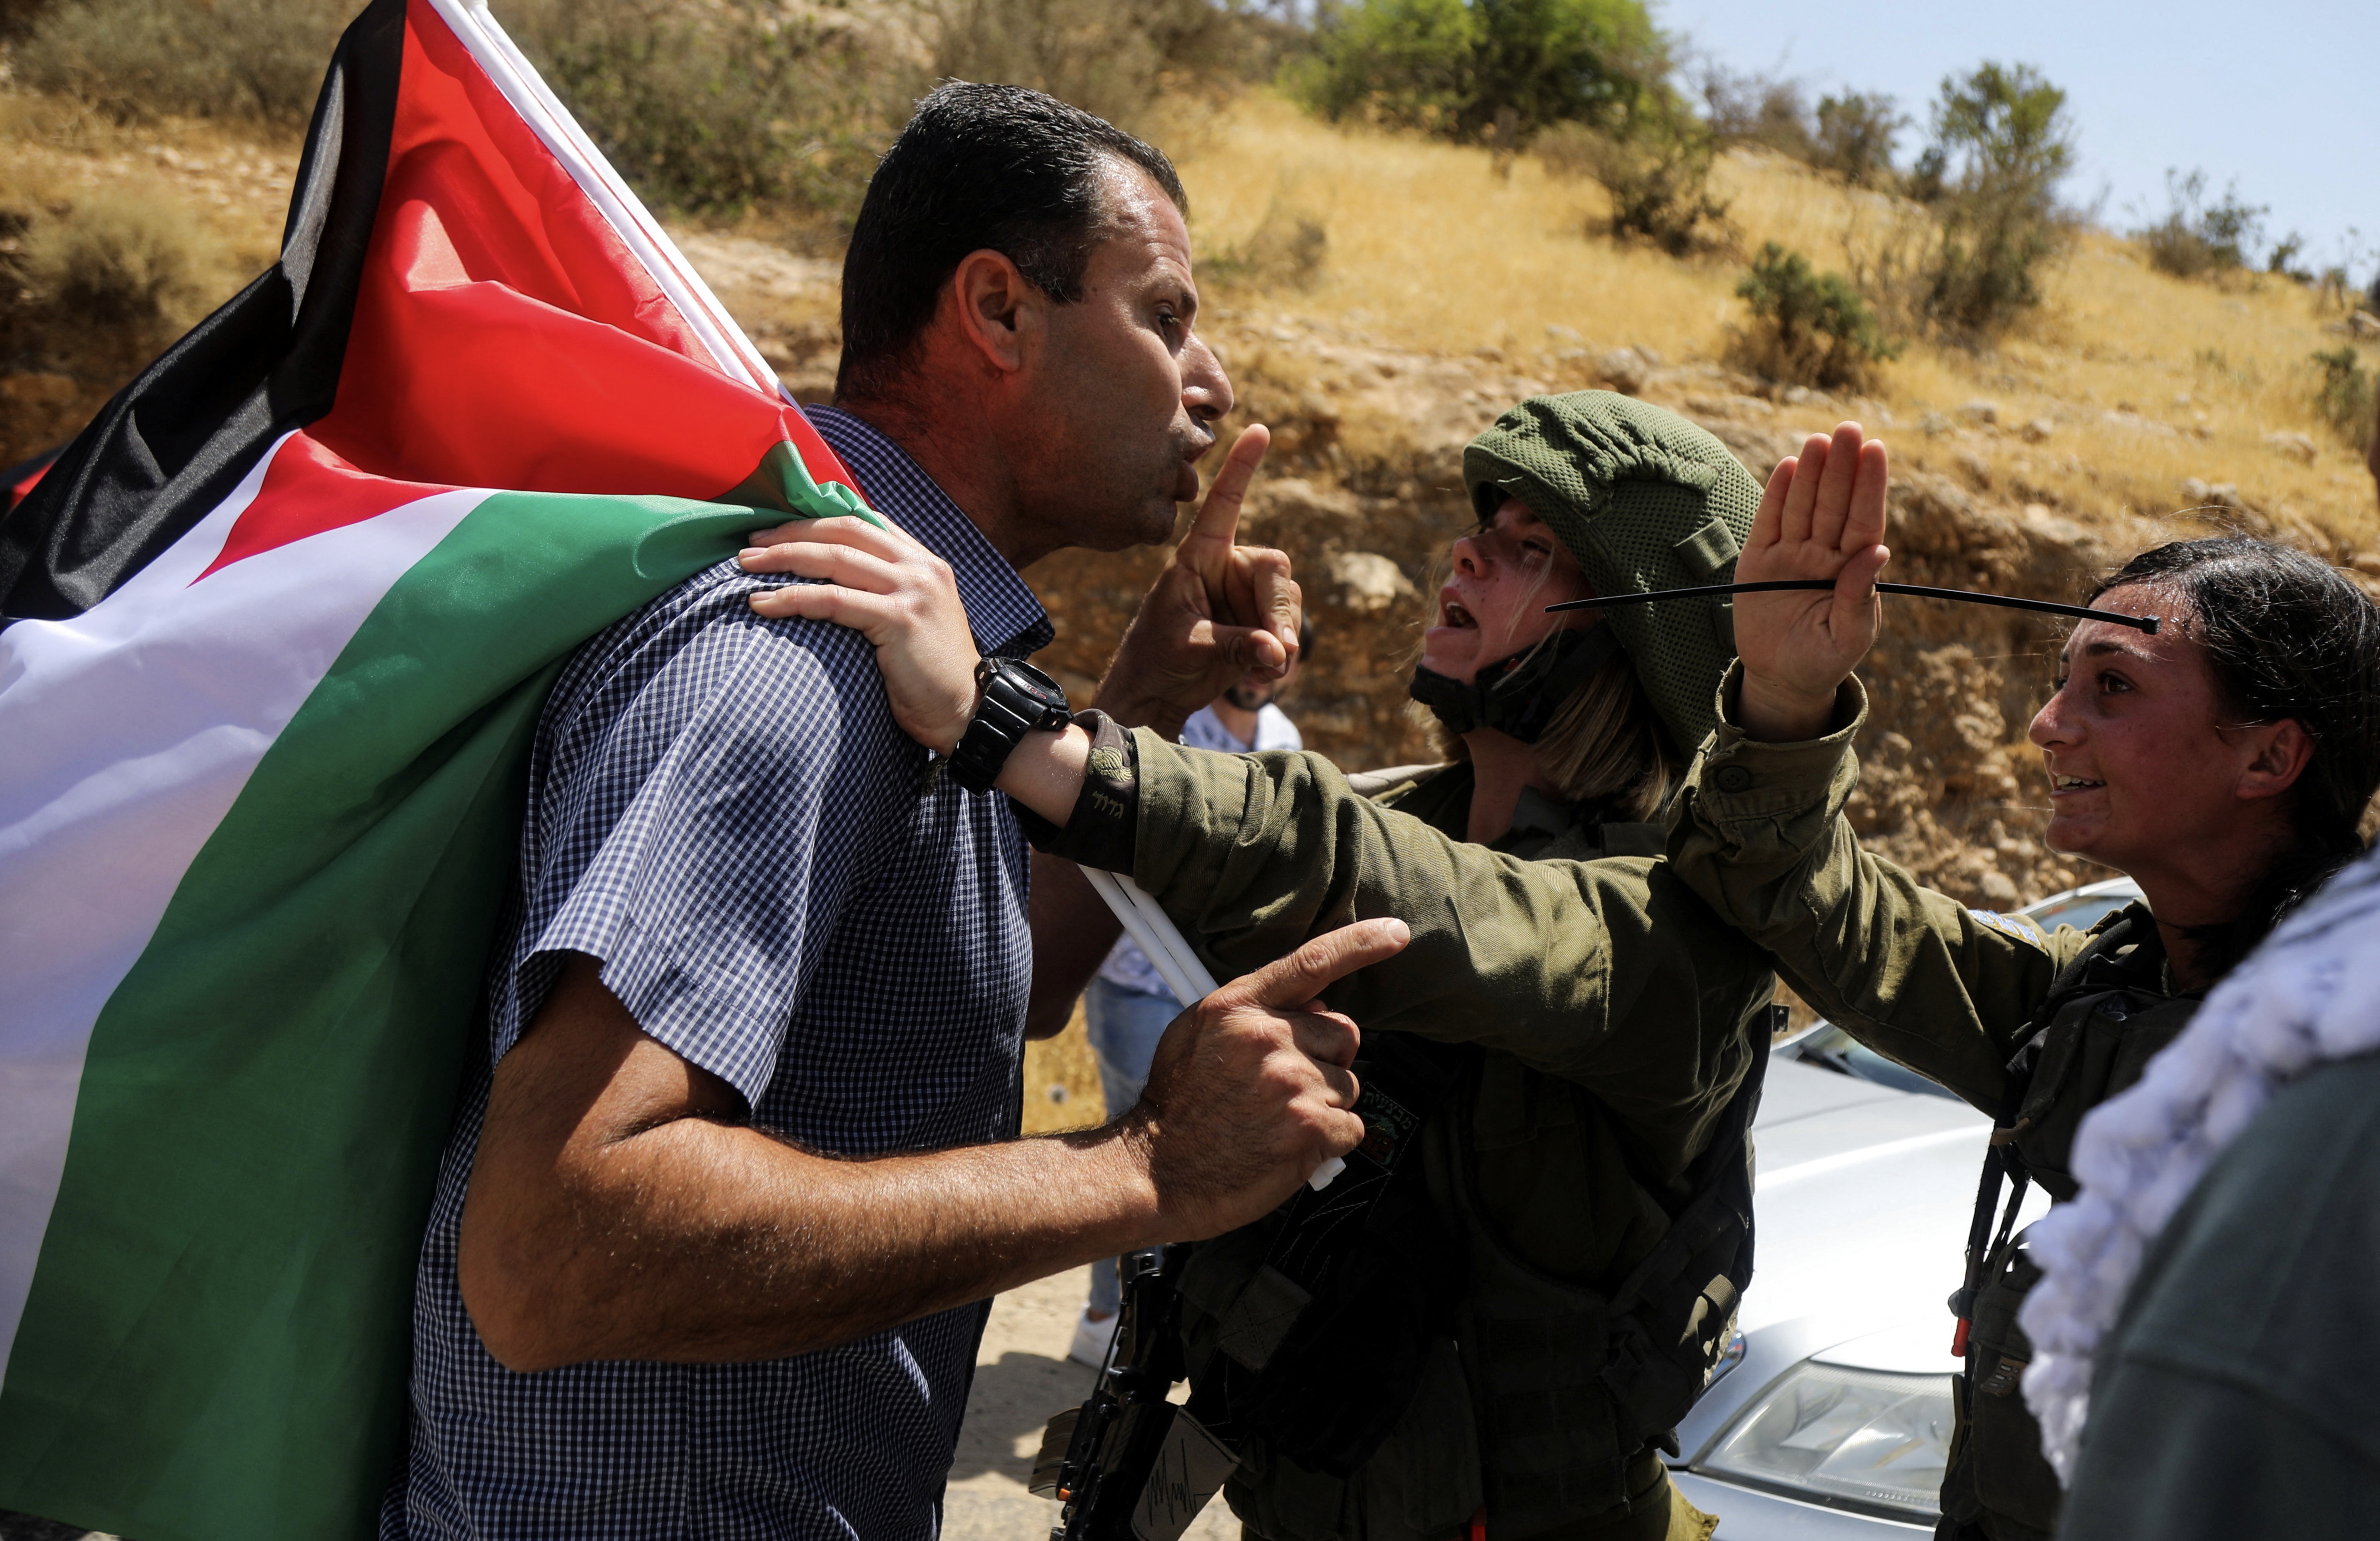 Israel's Human Rights Violations In Palestine Now Invites ICJ Judgment